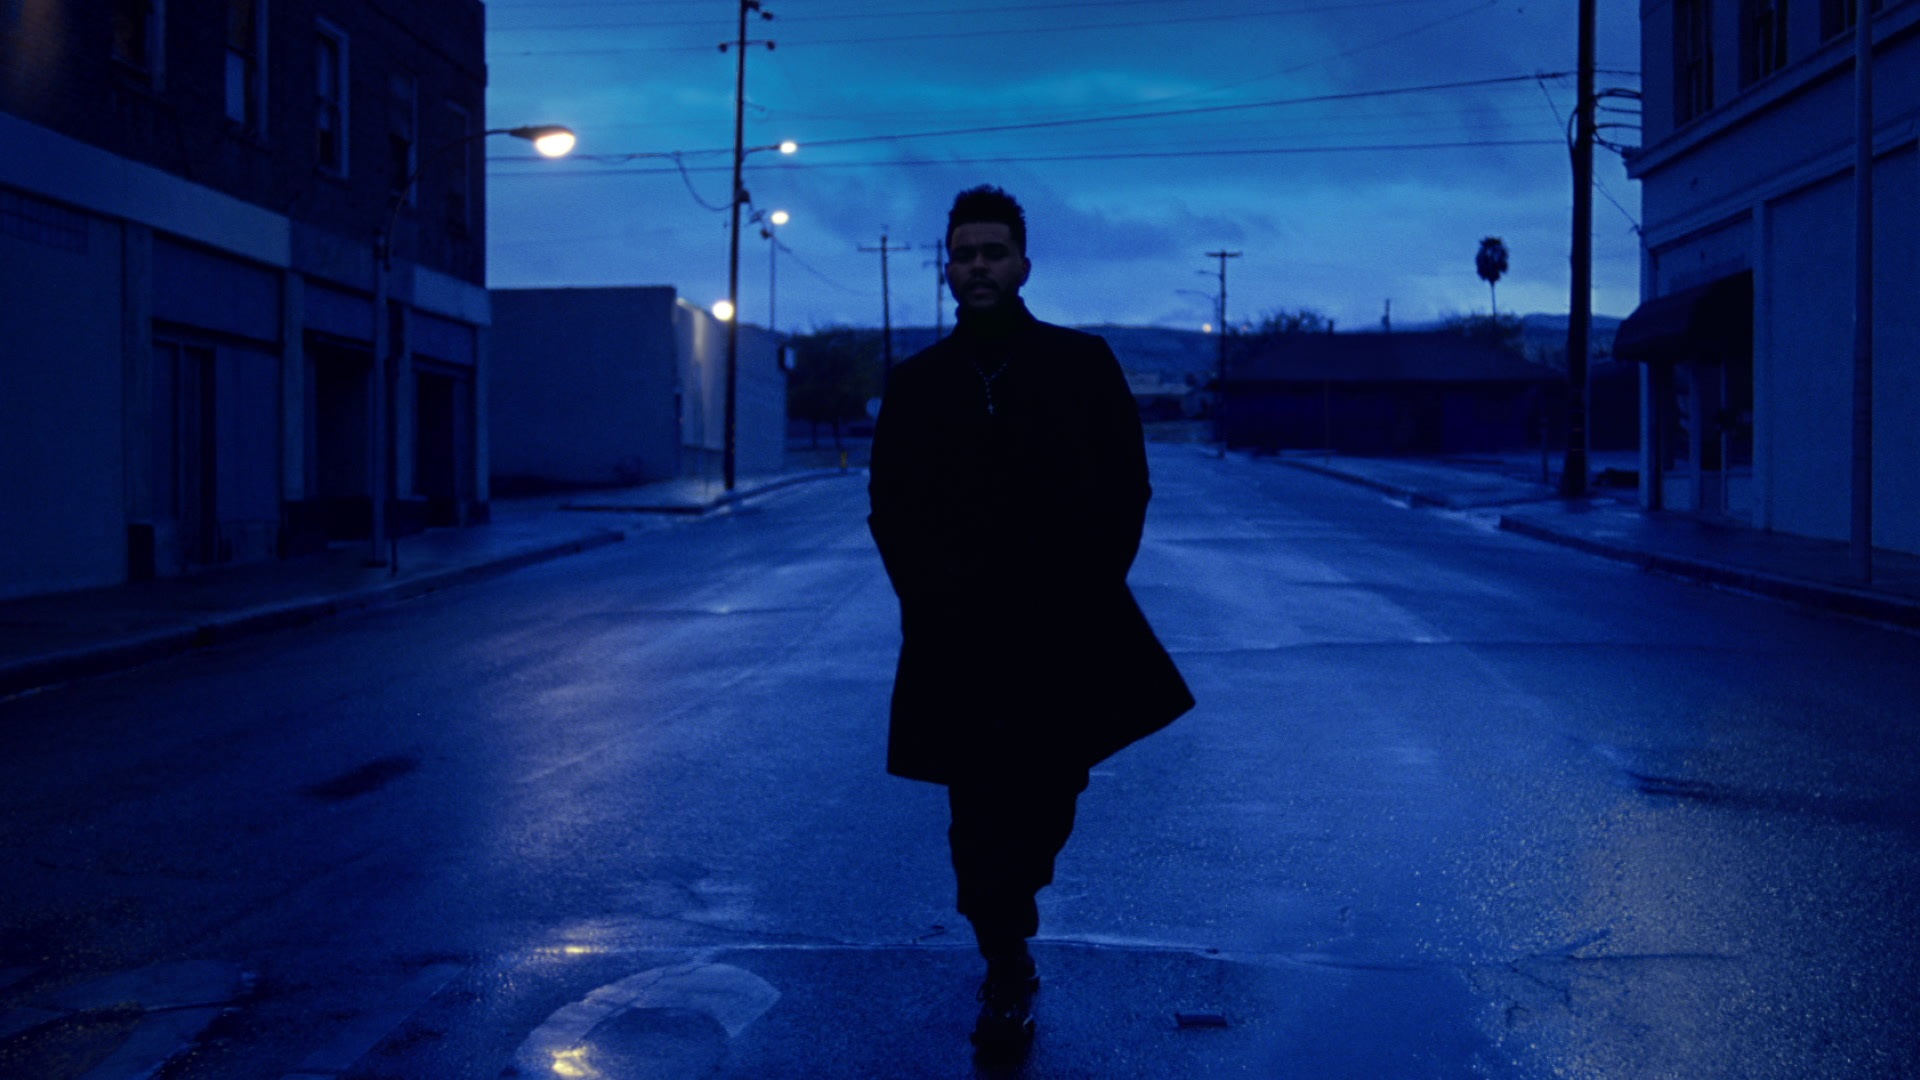 THE WEEKND RELEASES VIDEO FOR “CALL OUT MY NAME”